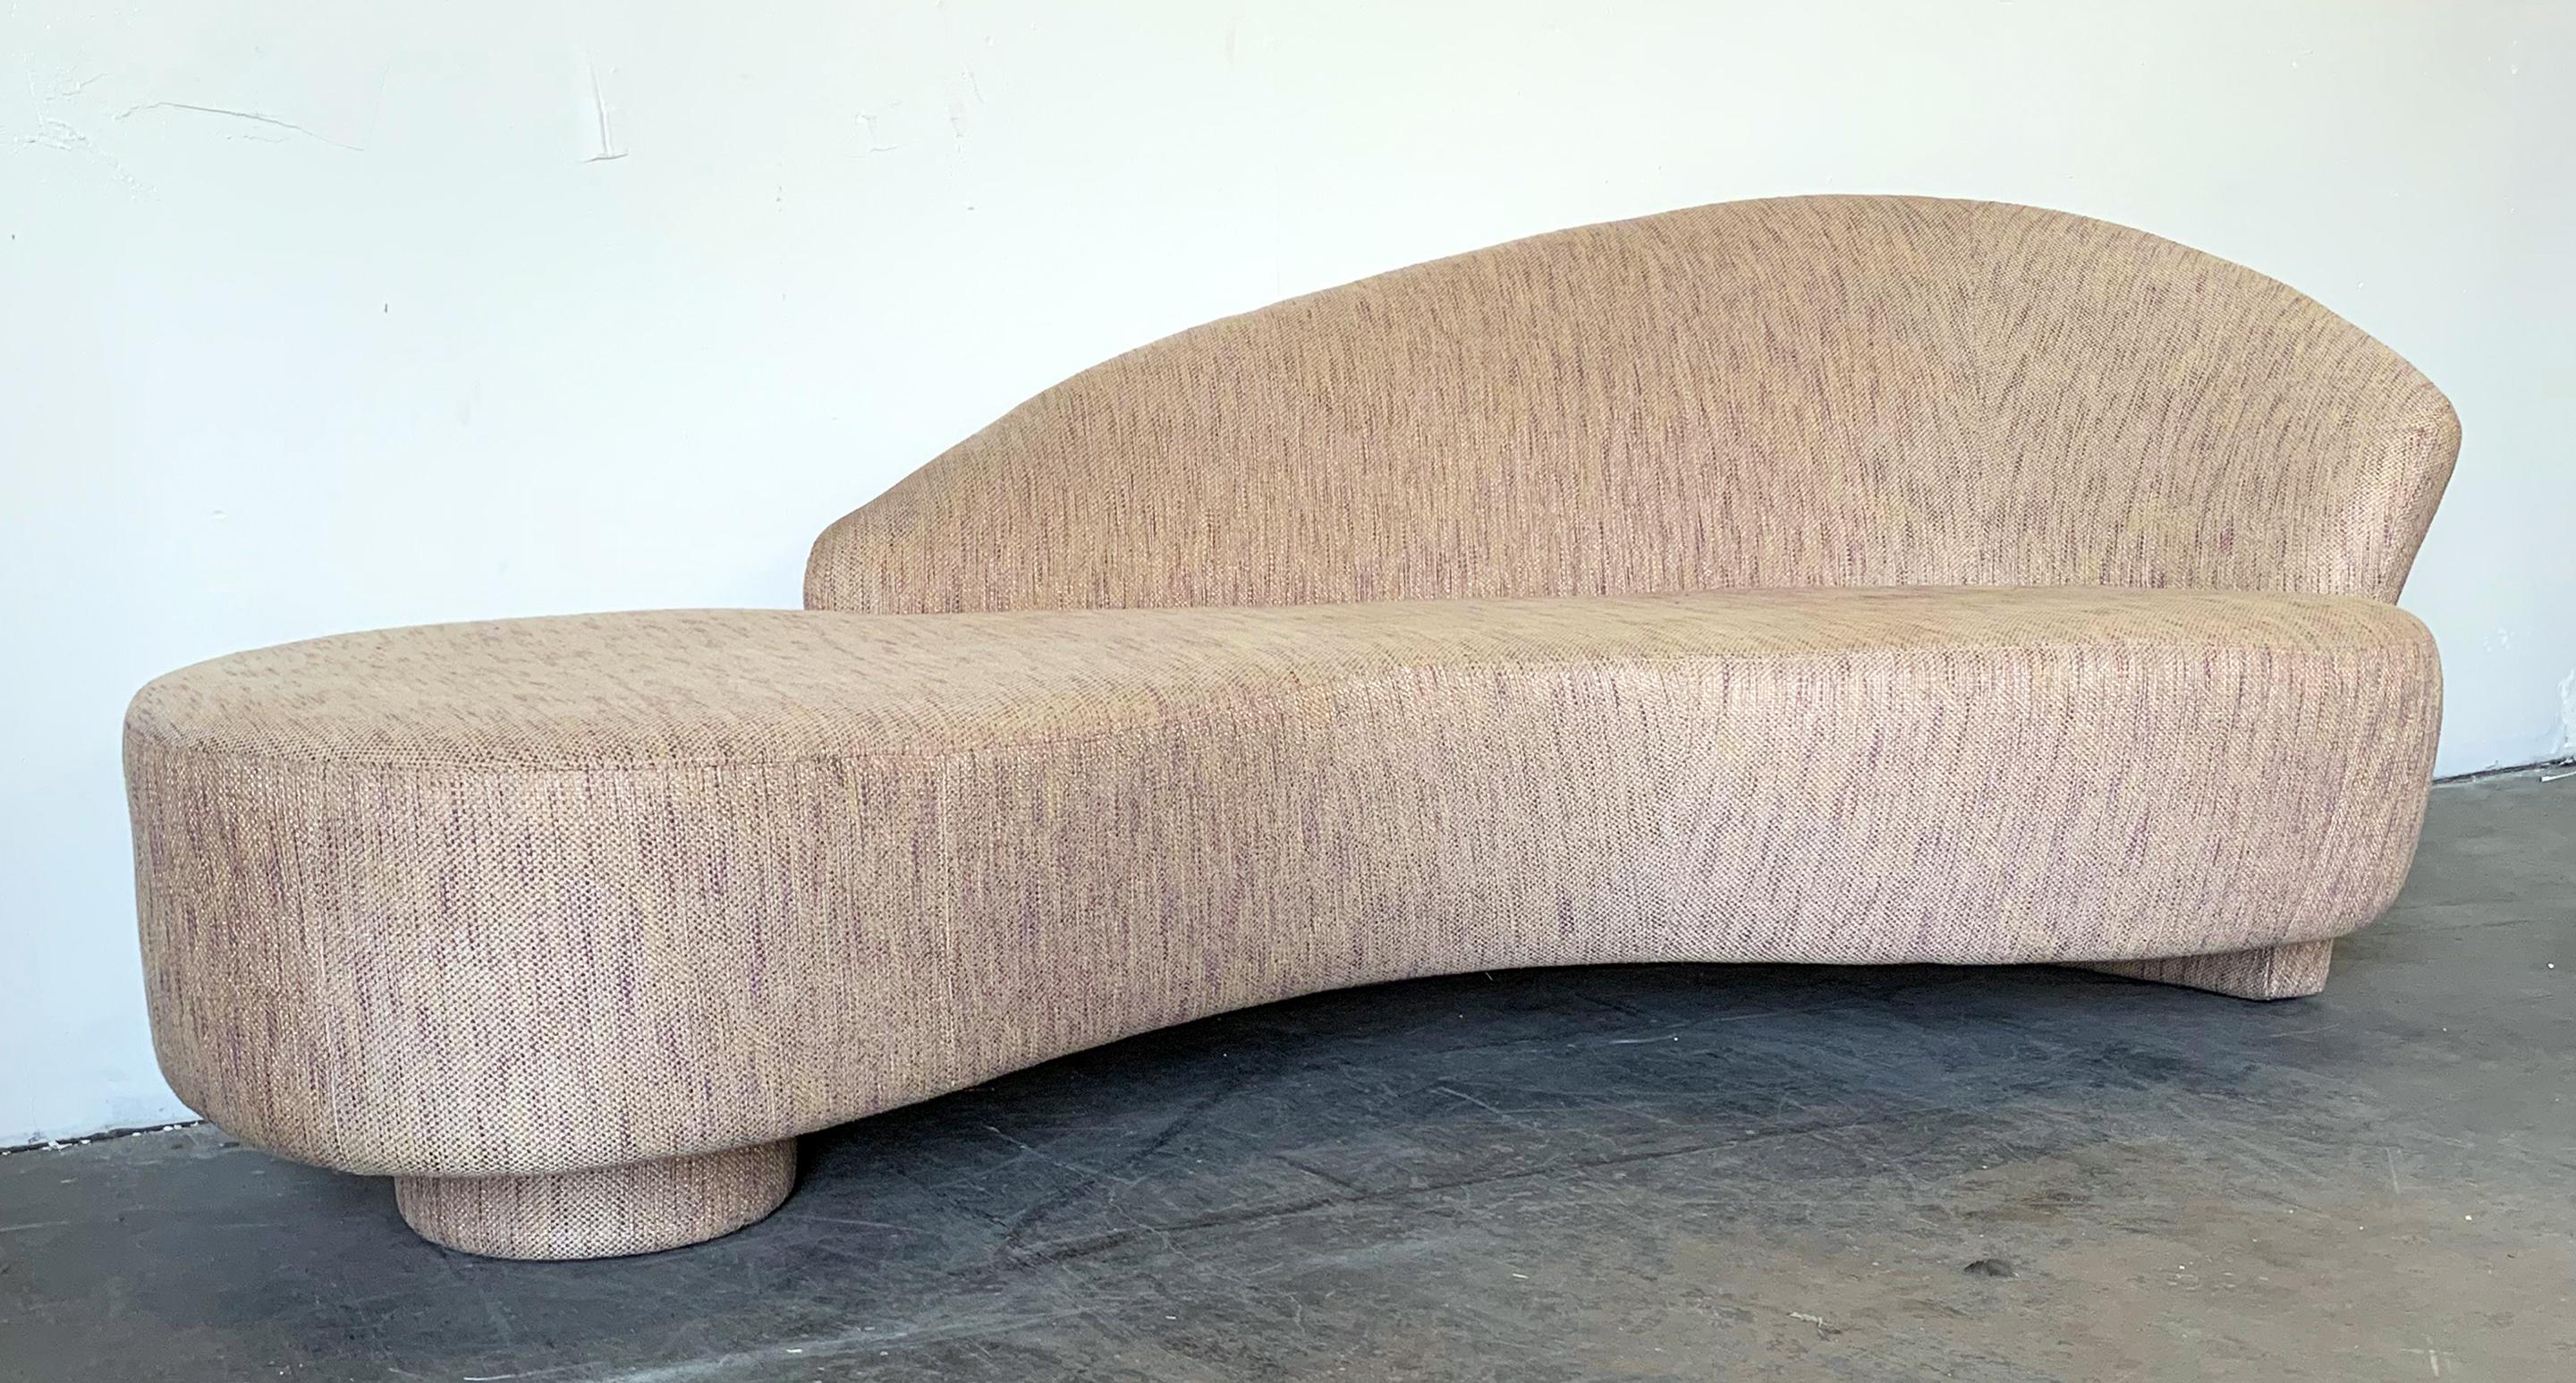 This sofa is absolutely stunning! It's a custom made Postmodern biomorphic / serpentine cloud sofa from the mid-1990s. The sofa features a single disc base with the back extending downward also as a leg.

This sofa is very reminiscent of Vladimir